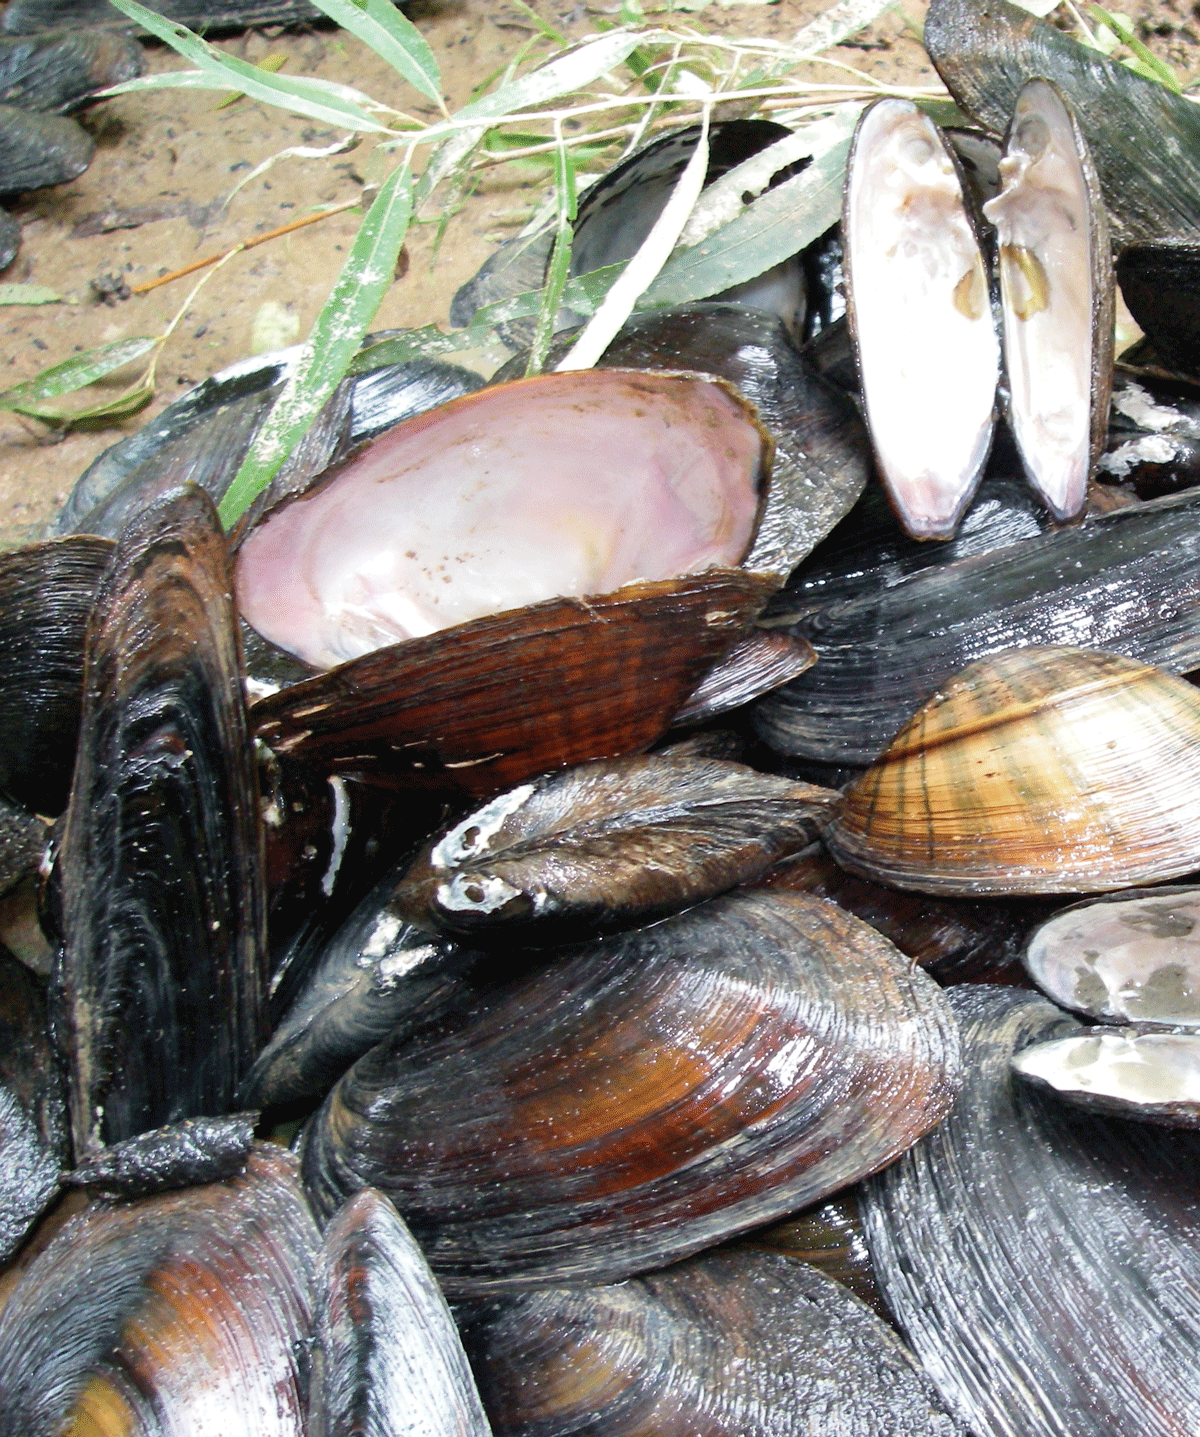 An assemblage of native freshwater mussels from the lower Altamaha River, Georgia.